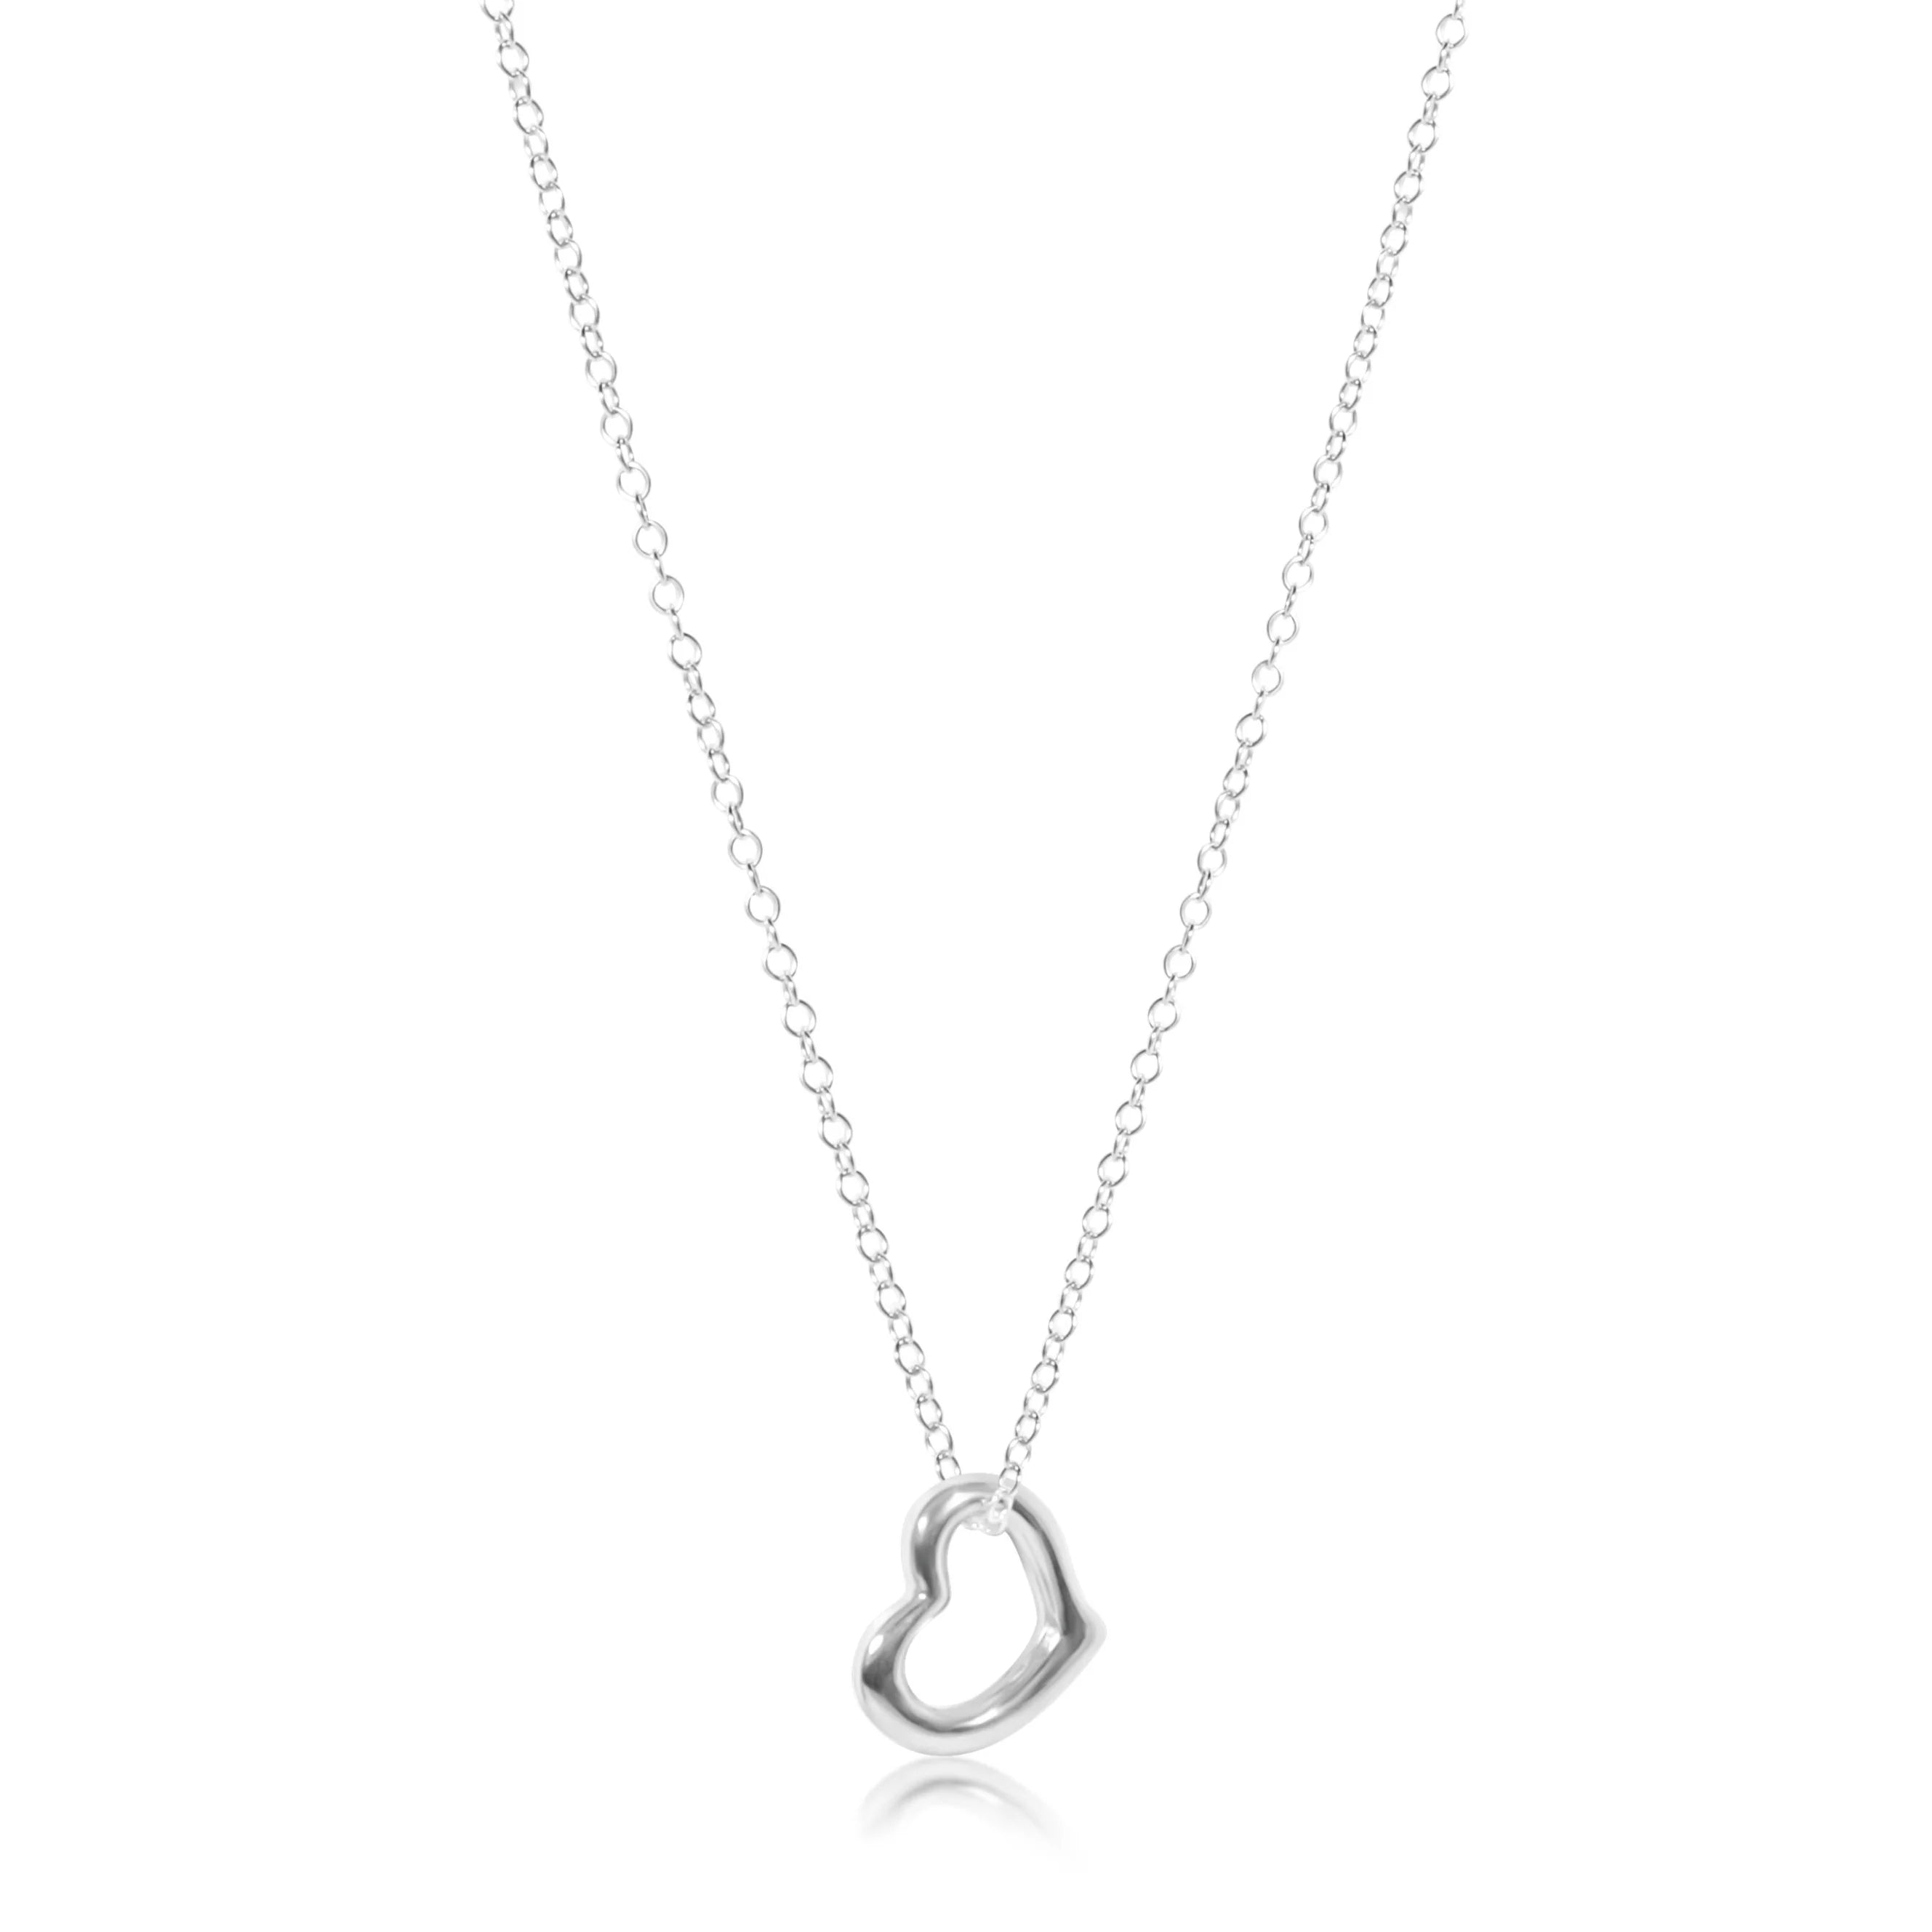 16" Love Charm Necklace Sterling